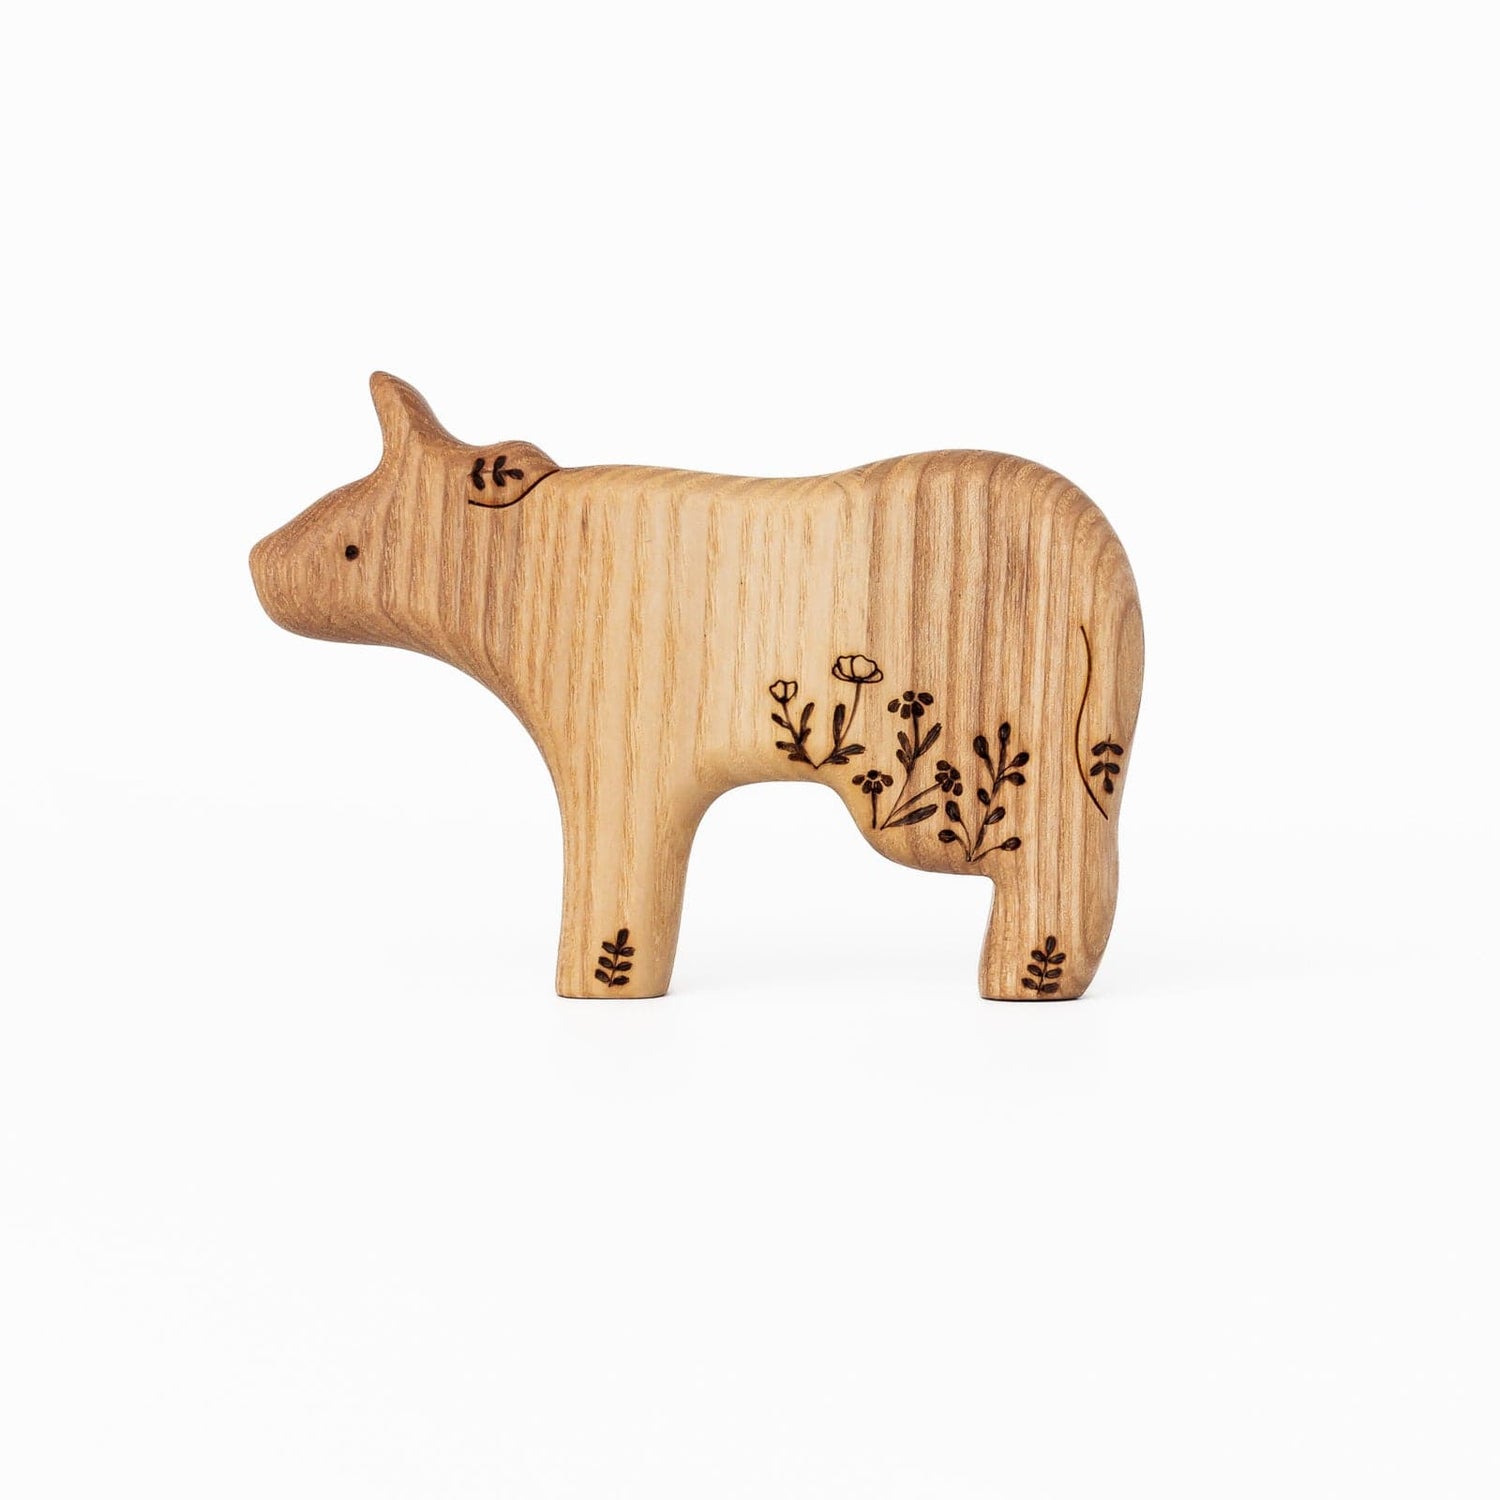 Tiny Fox Hole Wooden Animals Handmade Wooden Set of Cows (set of 3)